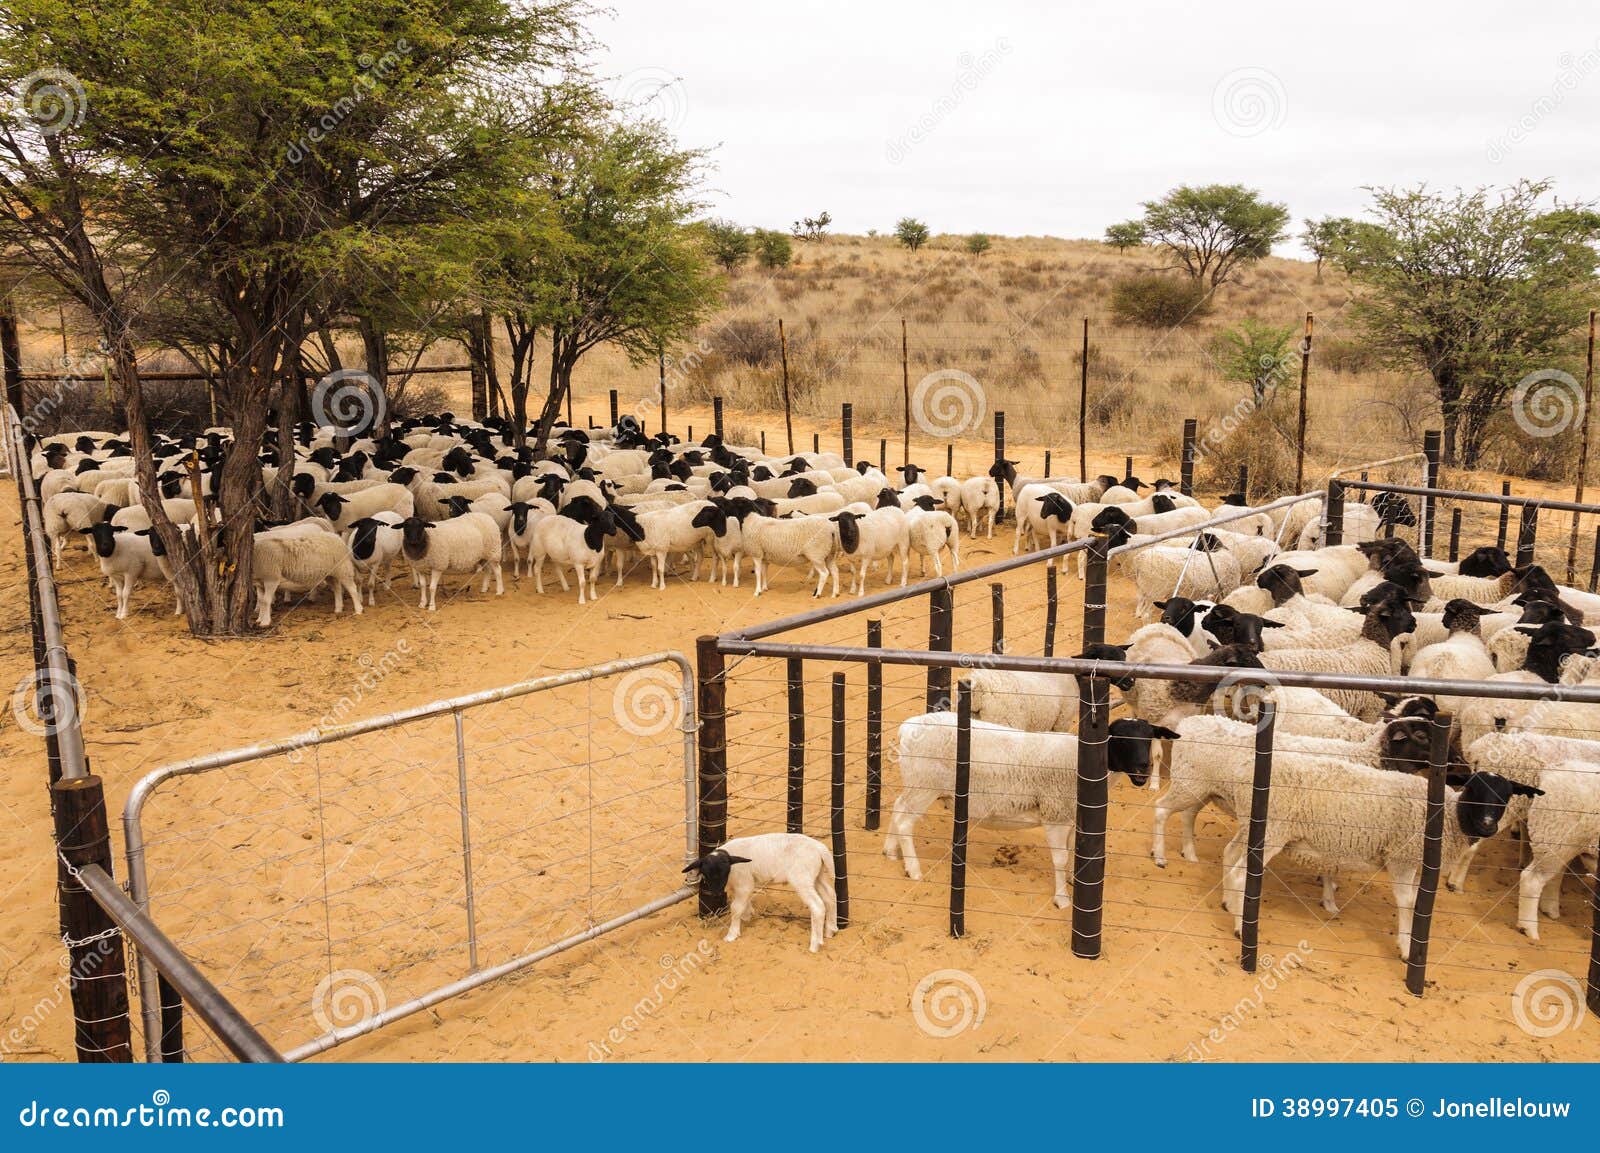 A Herd Of Dormer Sheep Crowded In A Stable Stock Photo 